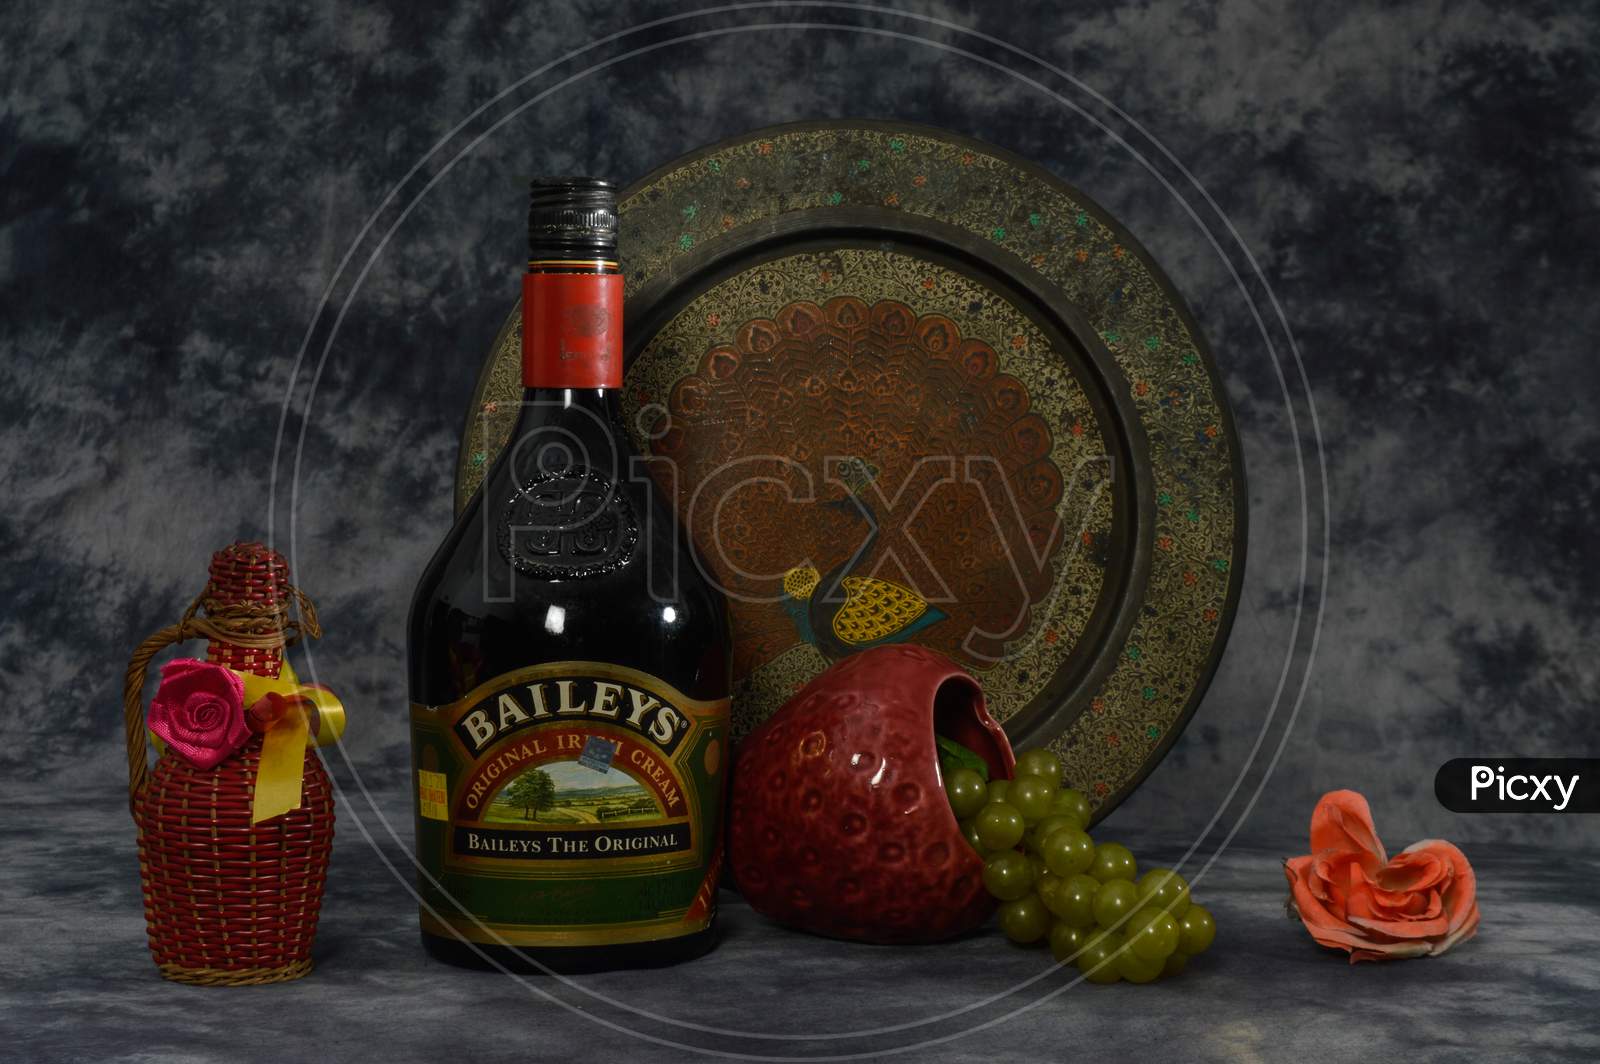 Still Life With Baileys, Grapes, Flower Isolated On The Cloth Background With Art Work